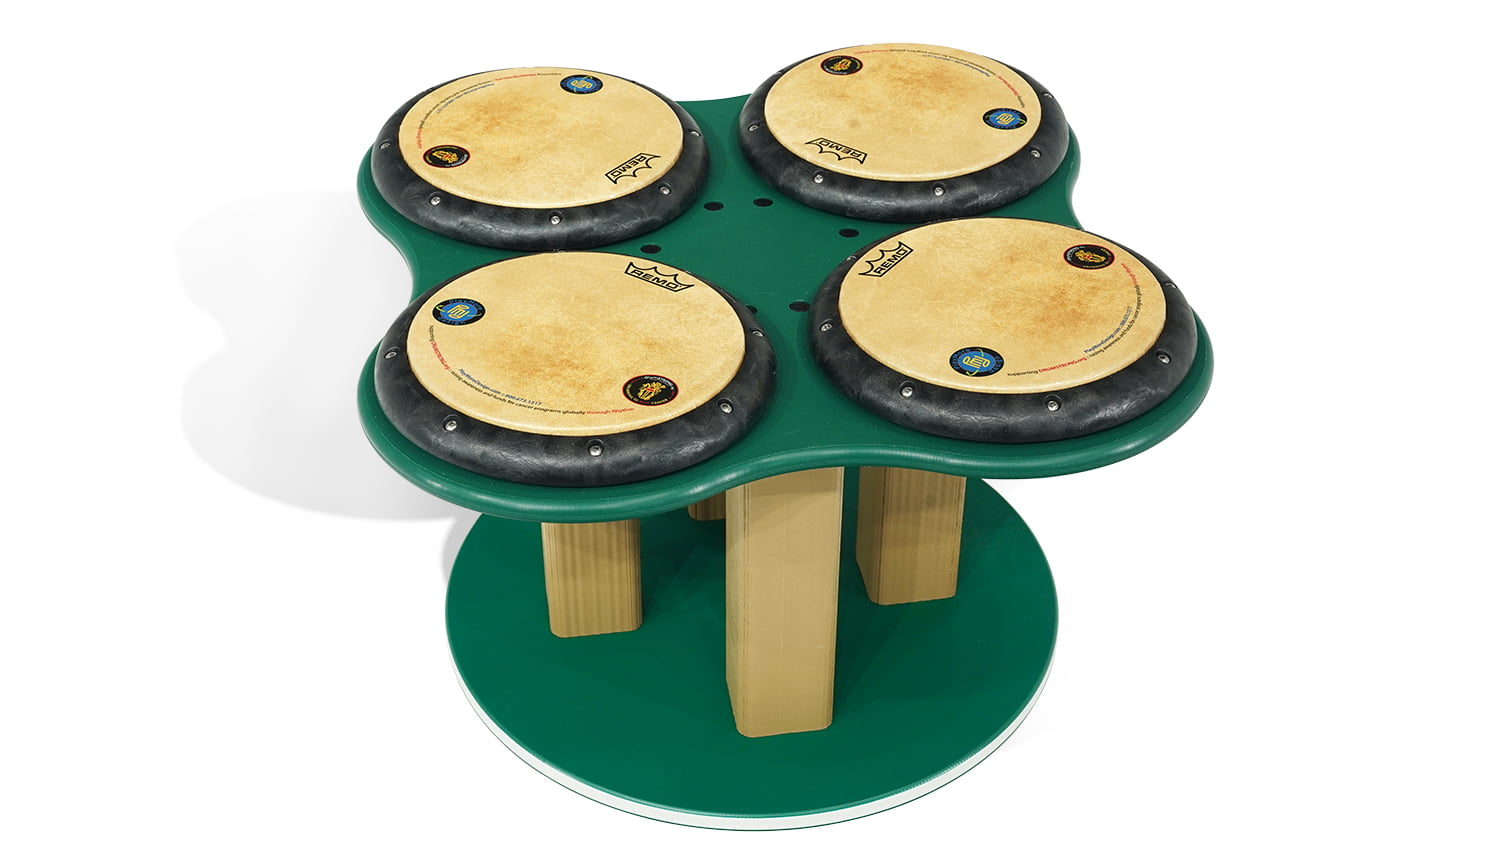 Quad Drum Table for the Playground